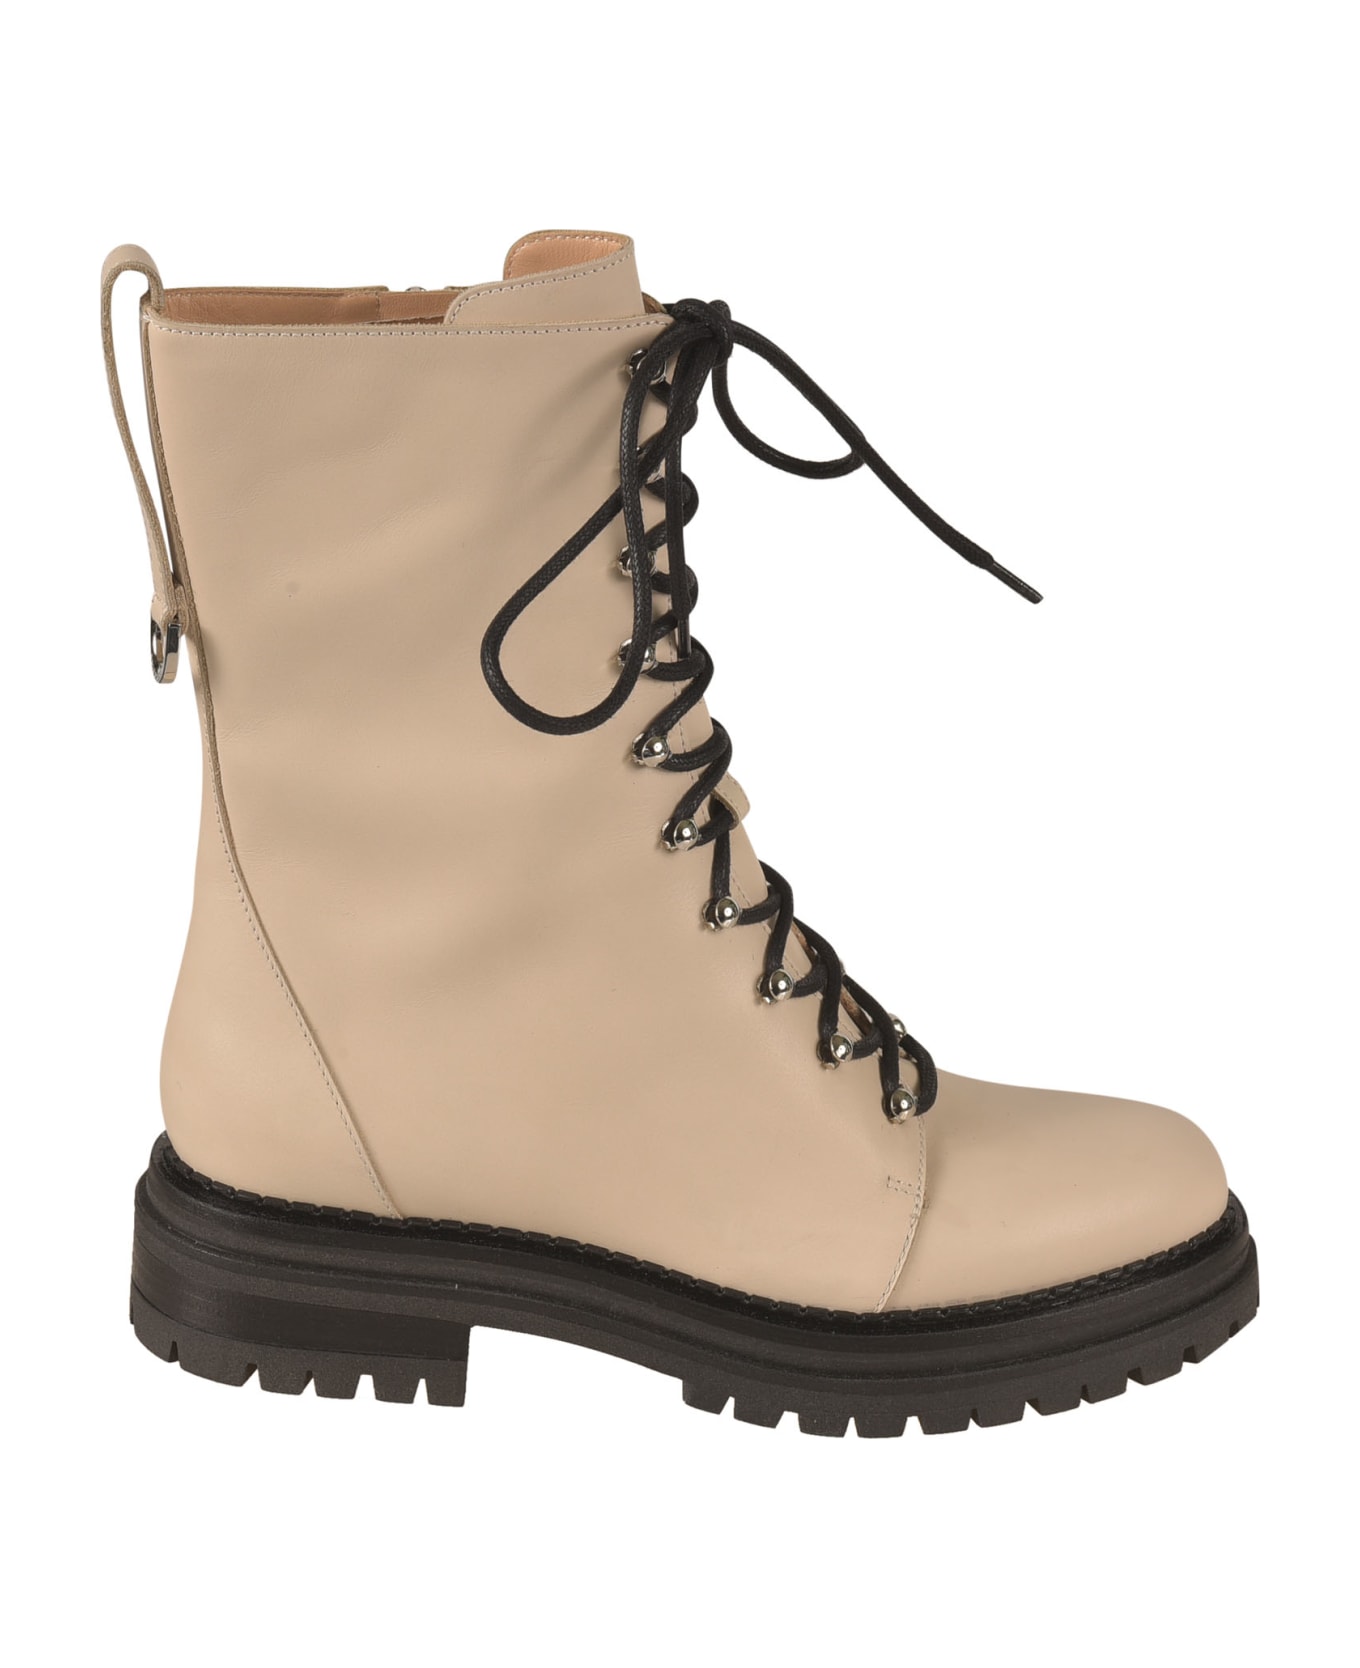 Sergio Rossi Joan Lace-up Boots - Beige